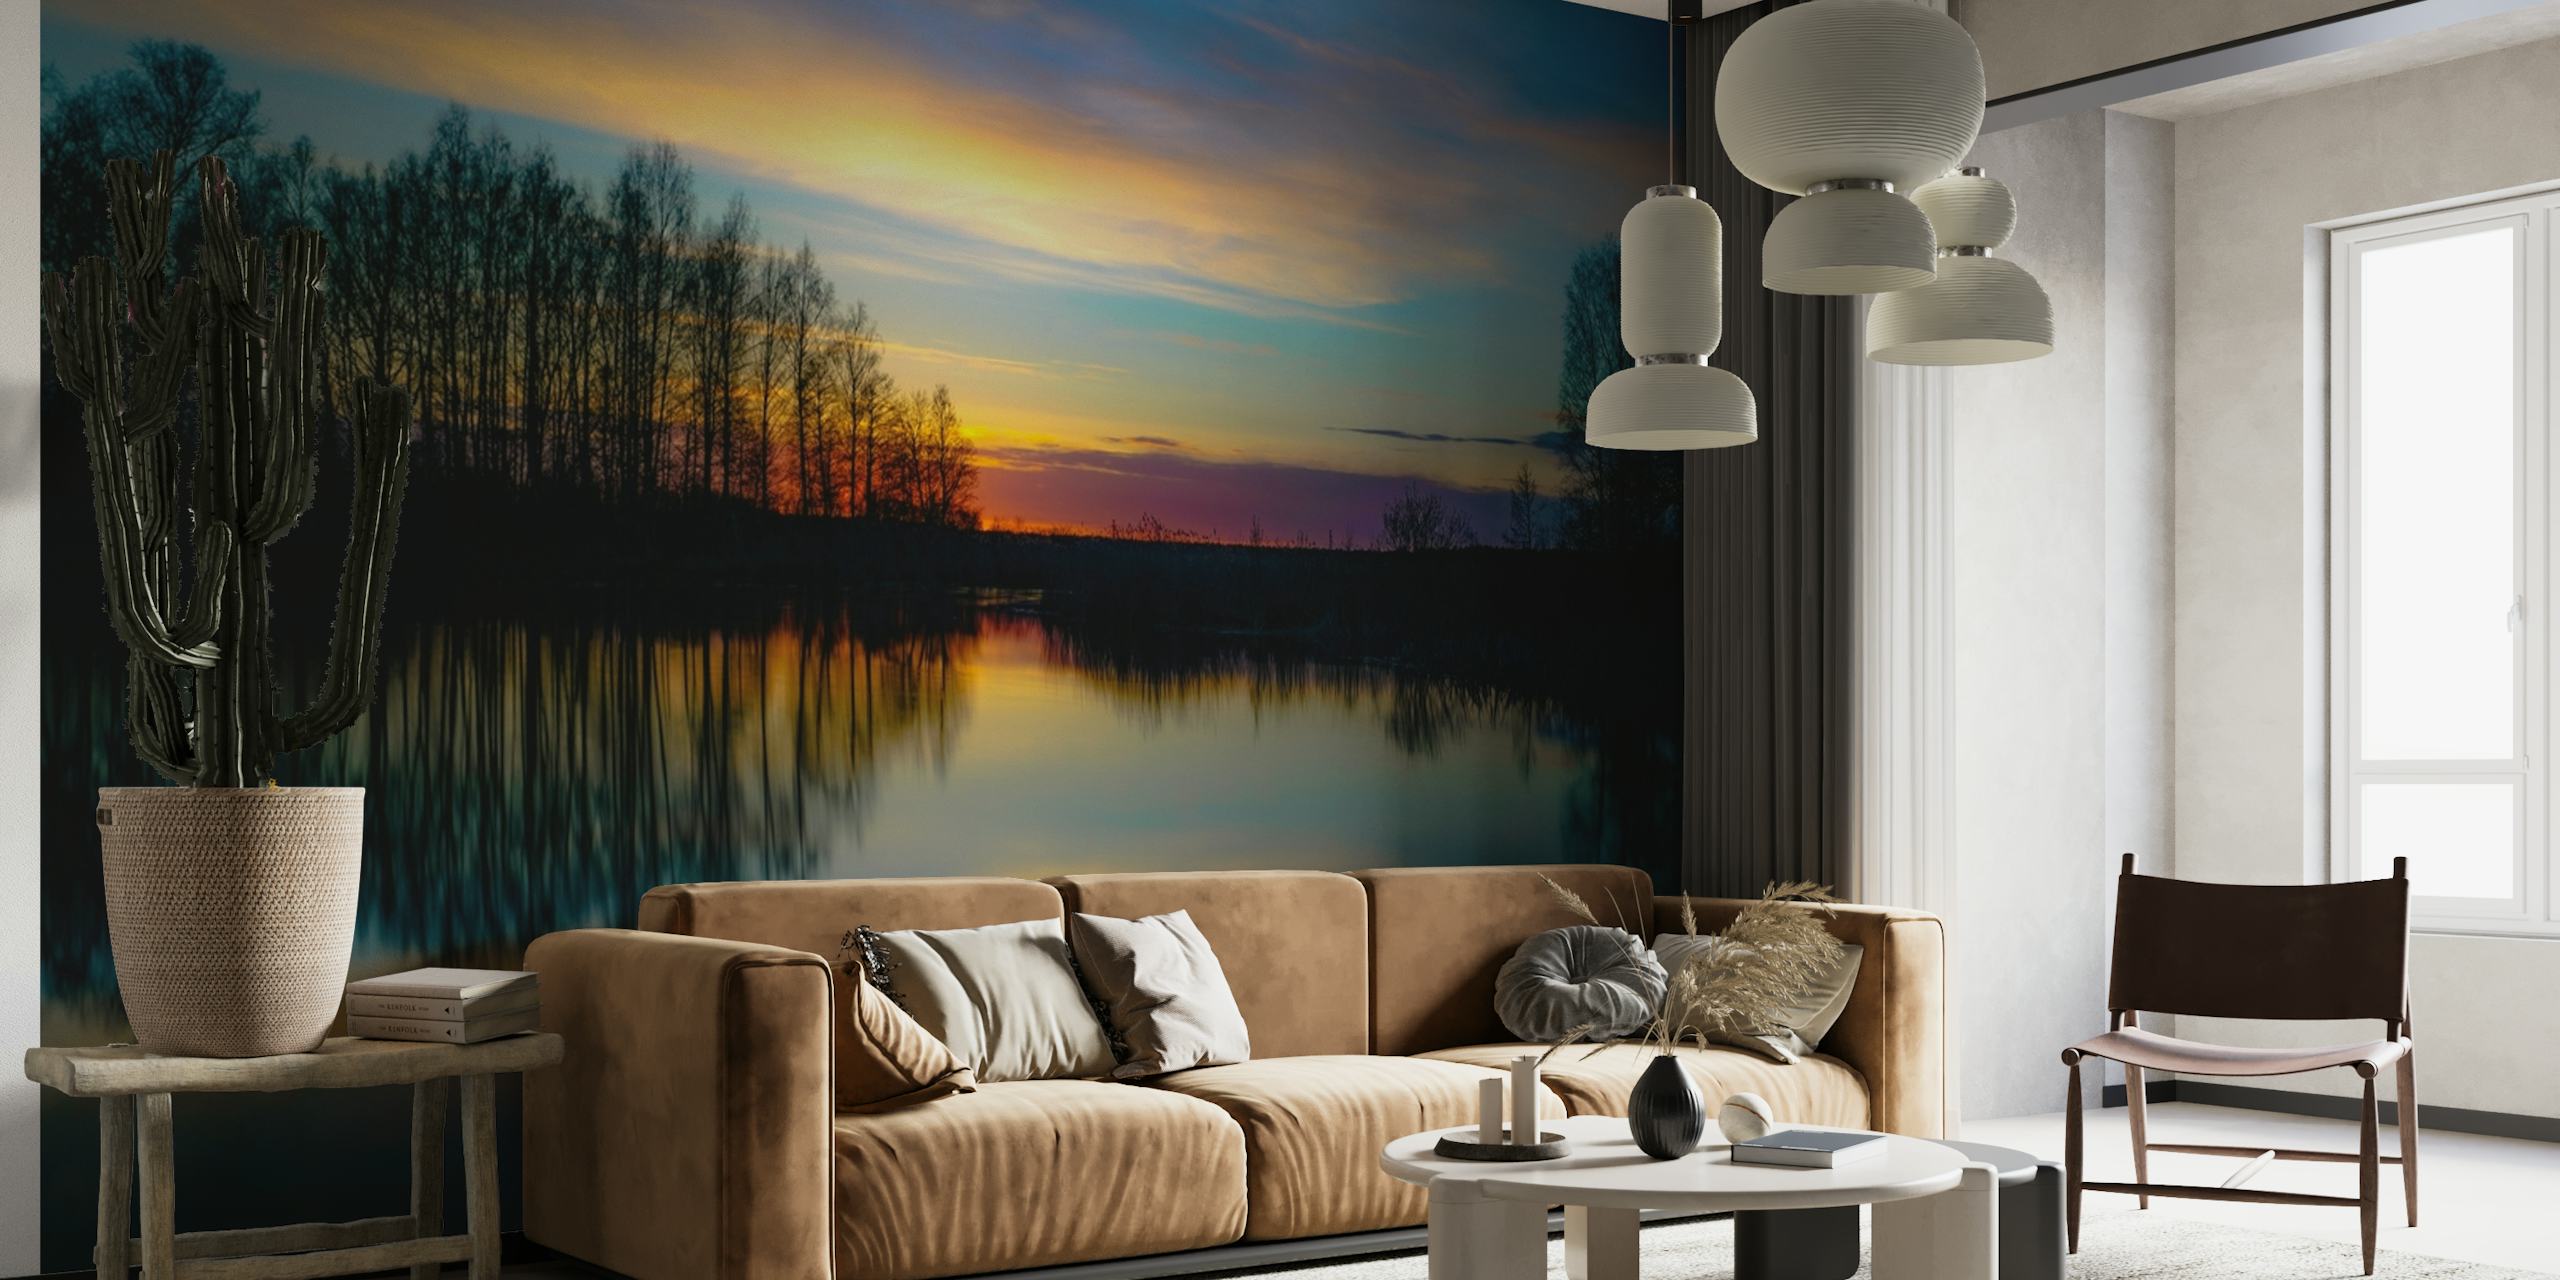 Wall mural of a tranquil lake sunset with vibrant colors and tree silhouettes